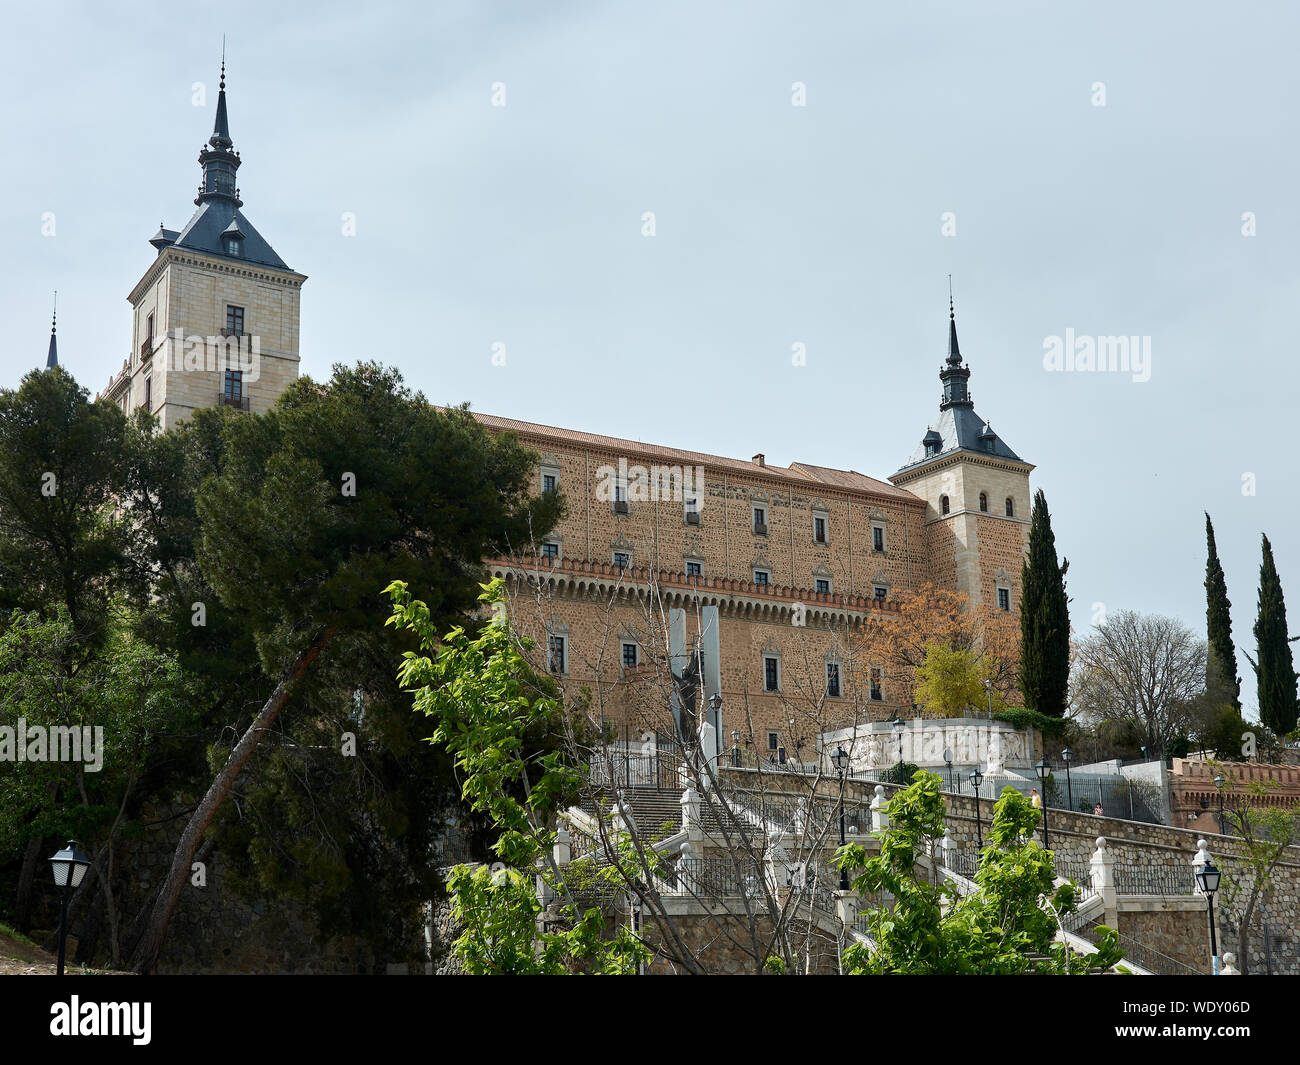 TOLEDO, SPAIN - APRIL 24, 2018: View of the Alcazar and the Monument to the Siege in Toledo. Stock Photo